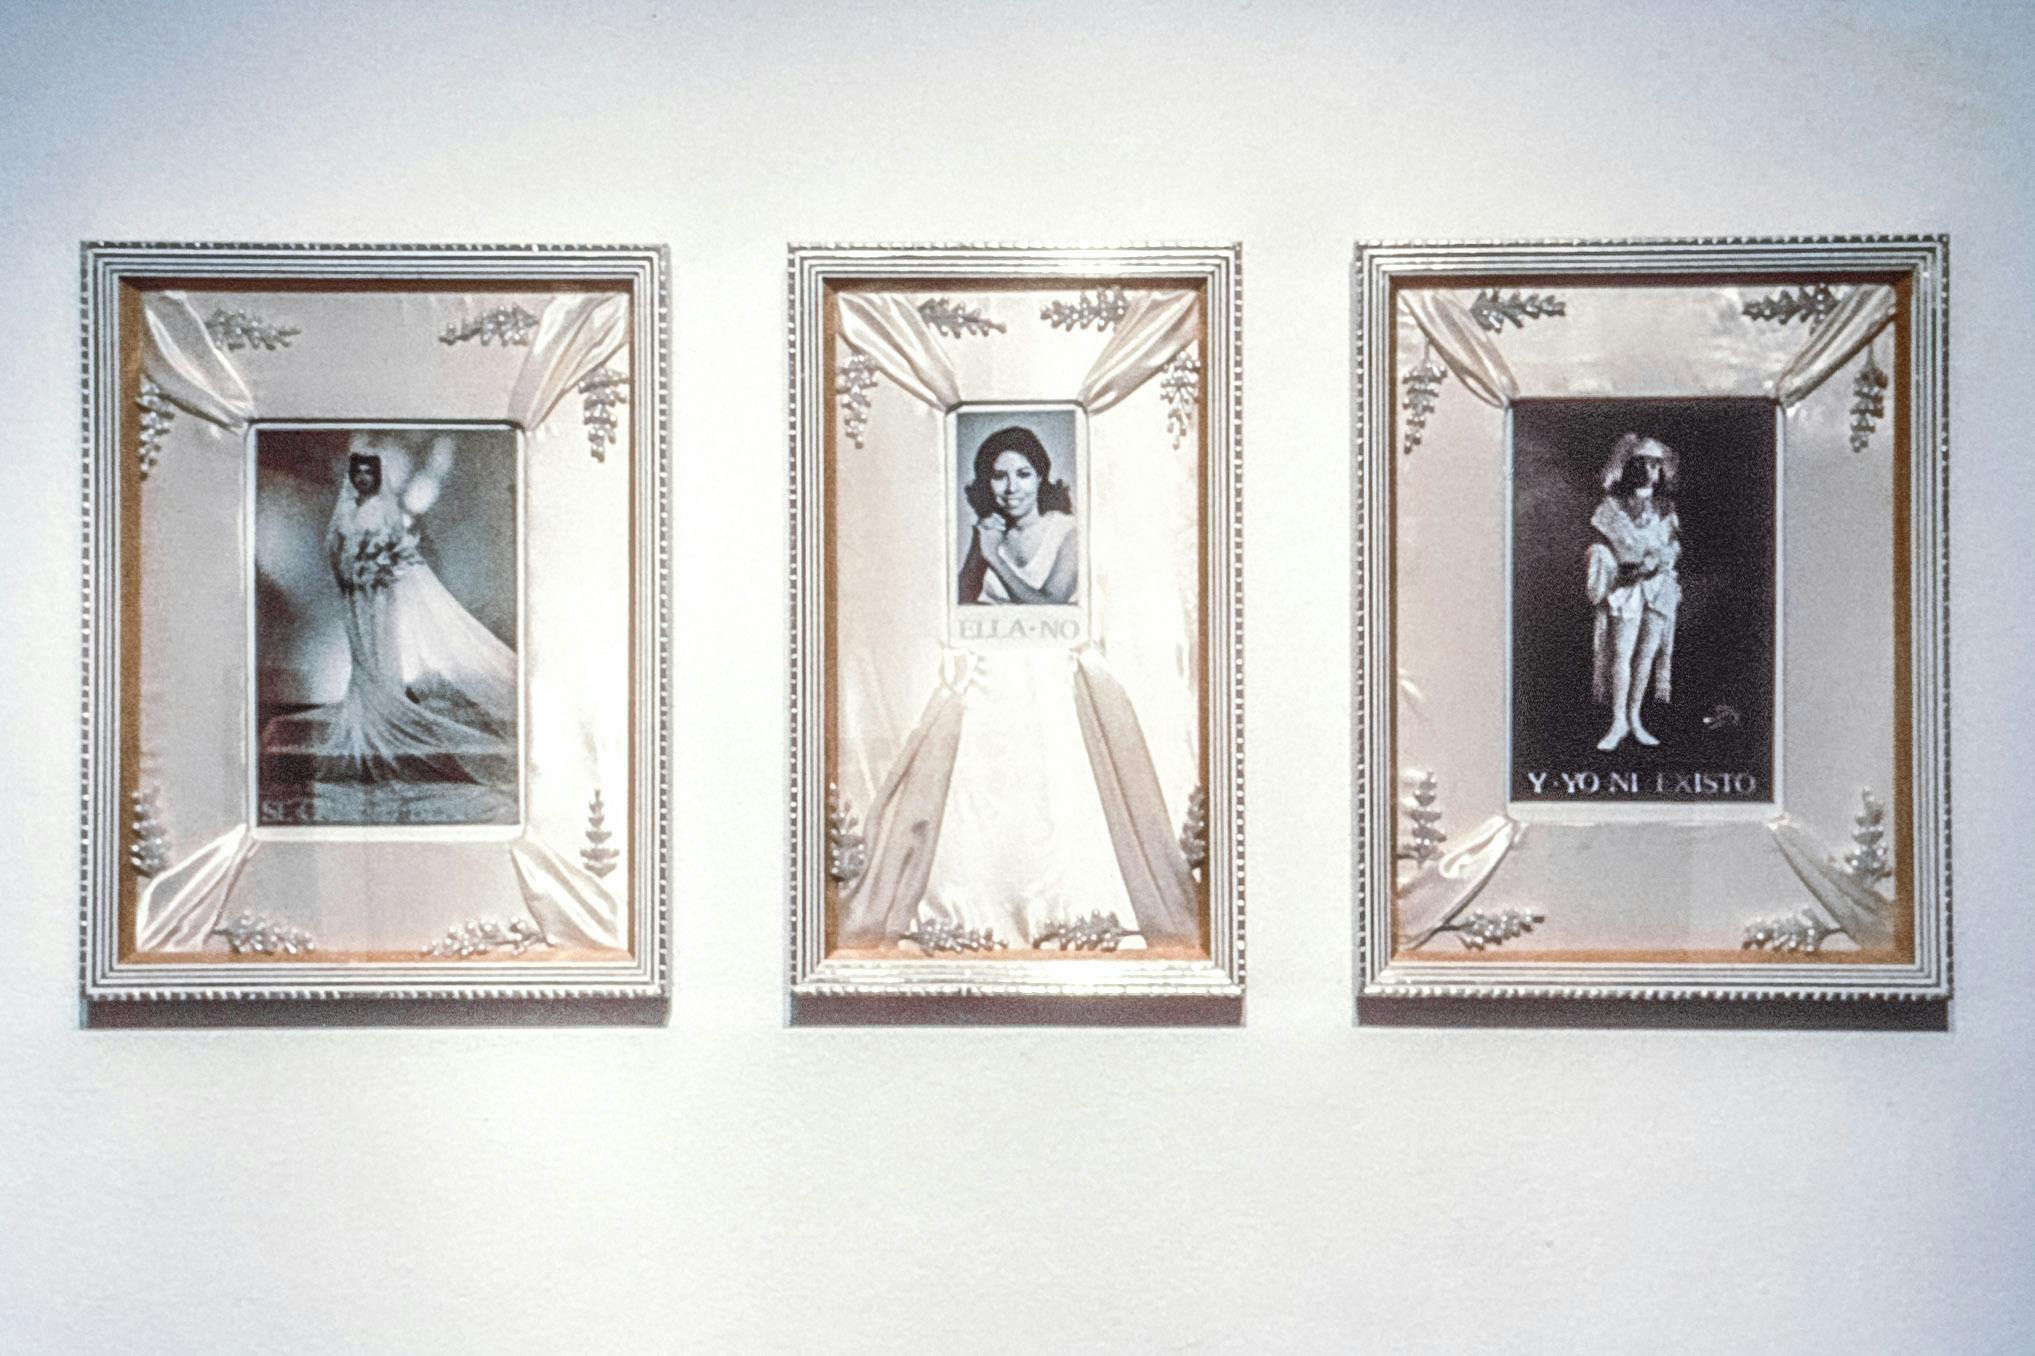 A series of three art pieces are mounted on a gallery wall. They are identically framed in silver, and in the middle each has black and white portrait photograph of a person. 